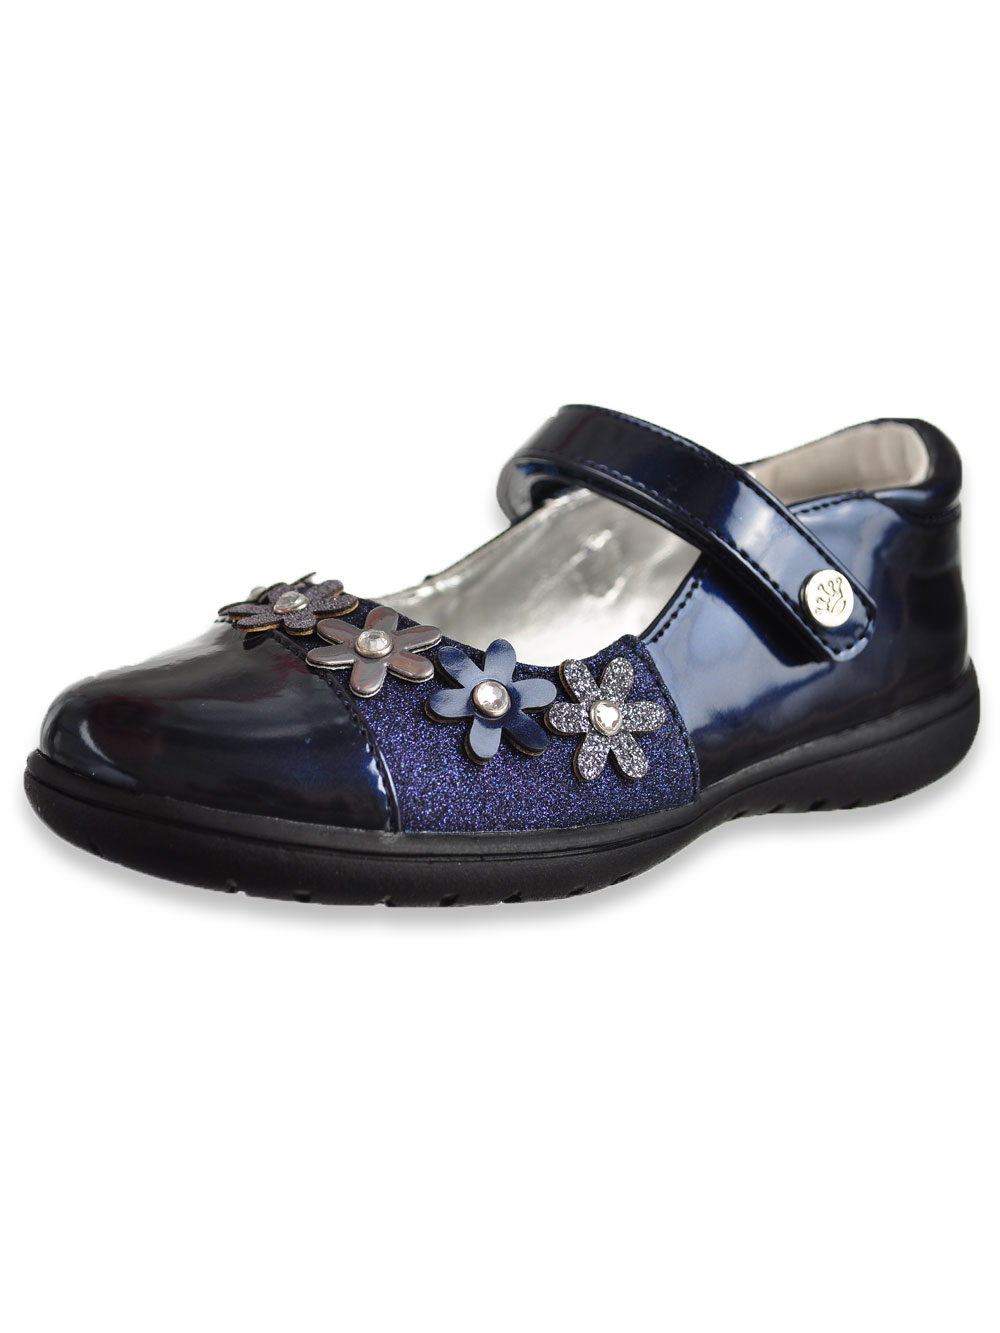 girls navy mary jane shoes